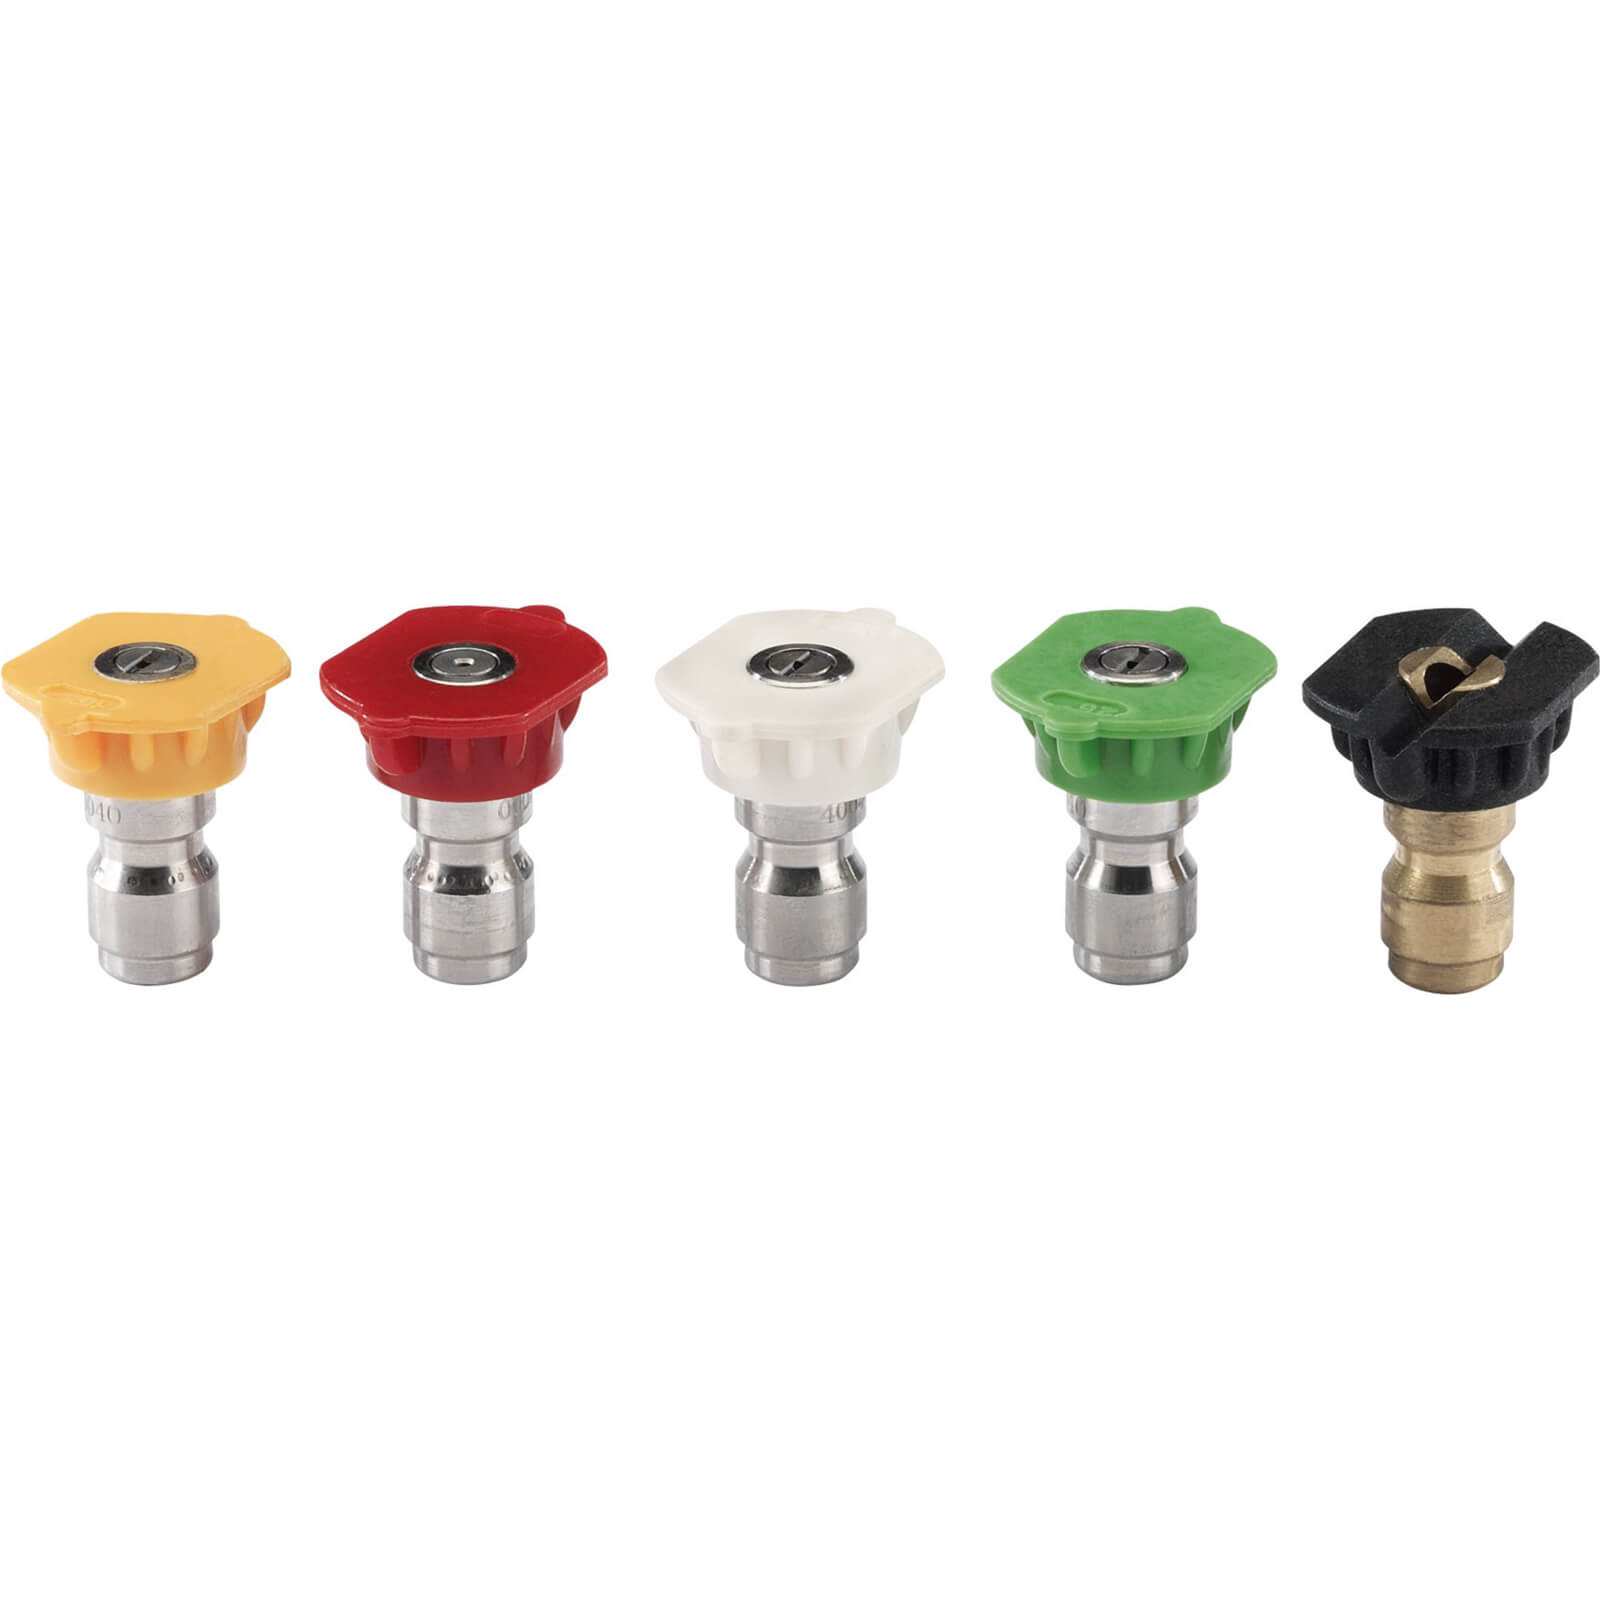 Photo of Draper 5 Piece Nozzle Set For Ppw540 Petrol Pressure Washer